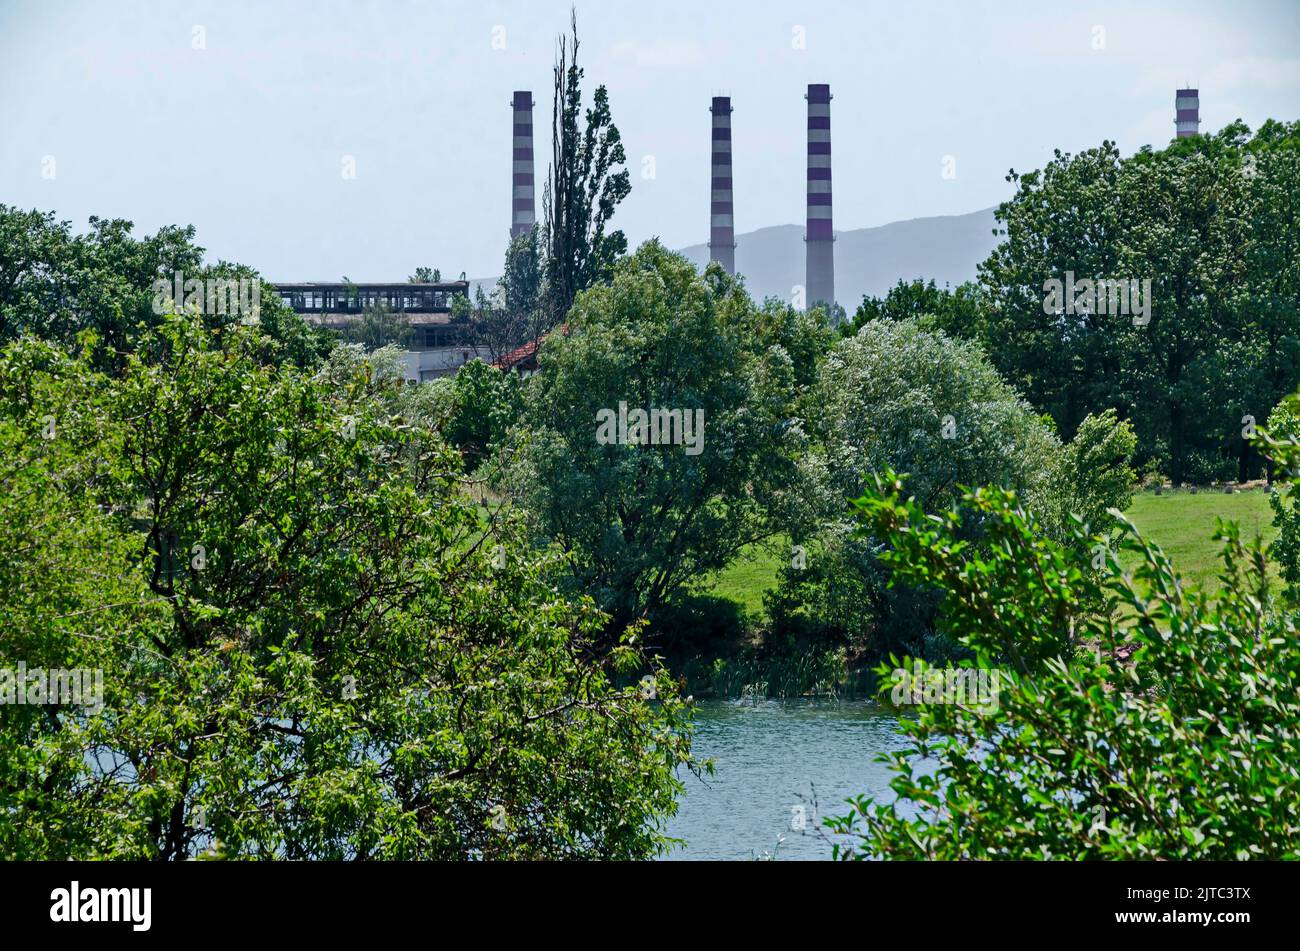 Spring green fresh trees and lake in residential area Drujba against the background of the chimneys of the Thermal Power Plant, Sofia, Bulgaria Stock Photo